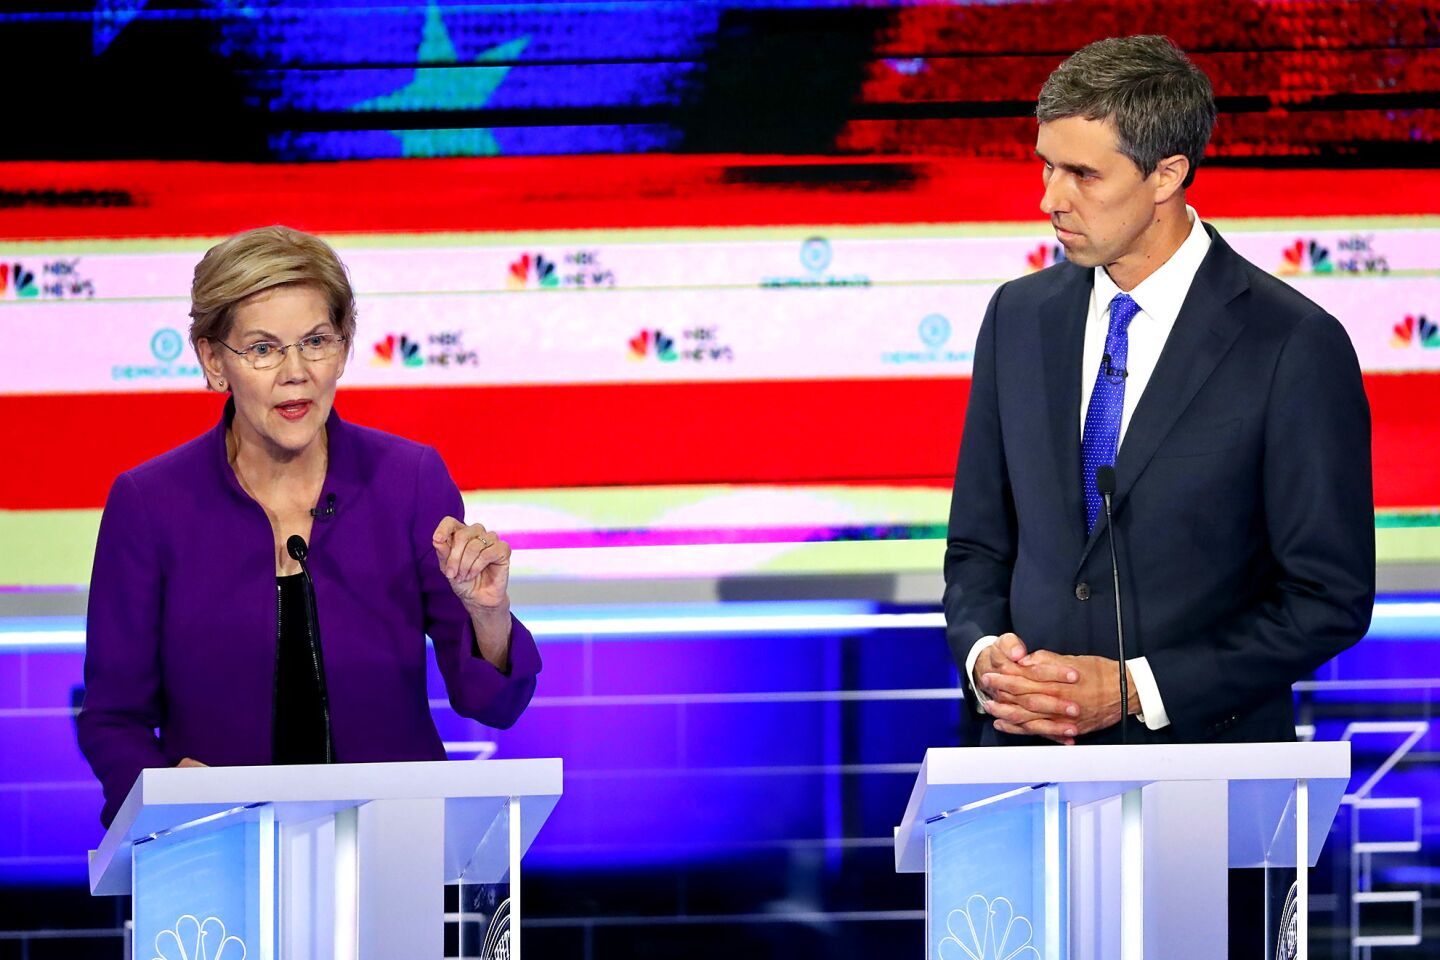 Democratic presidential candidate Sen. Elizabeth Warren, D-Mass., answers a question, as former Texas Rep. Beto O'Rourke listens during a Democratic primary debate hosted by NBC News at the Adrienne Arsht Center for the Performing Art, Wednesday, June 26, 2019, in Miami.